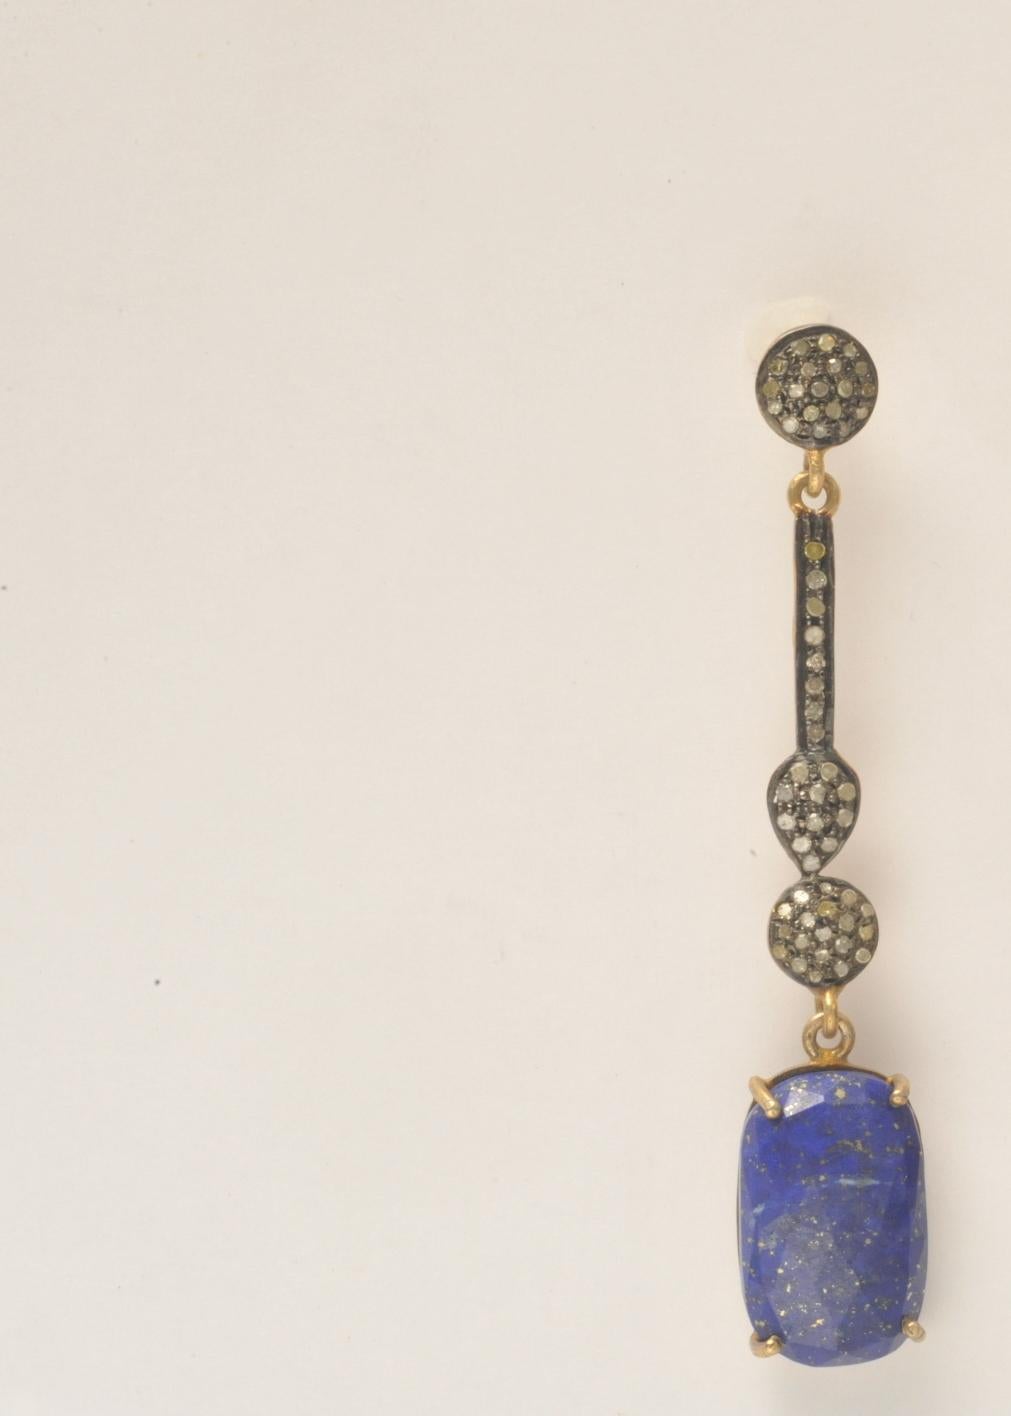 Pair of pave` set diamonds in oxidized sterling with faceted lapis lazuli.  18K gold post for pierced ears.  1.10 carats of diamonds, 24.50 carats of lapis.   Lapis stone dimensions are 7/16 inches wide x 3/4 inch long.